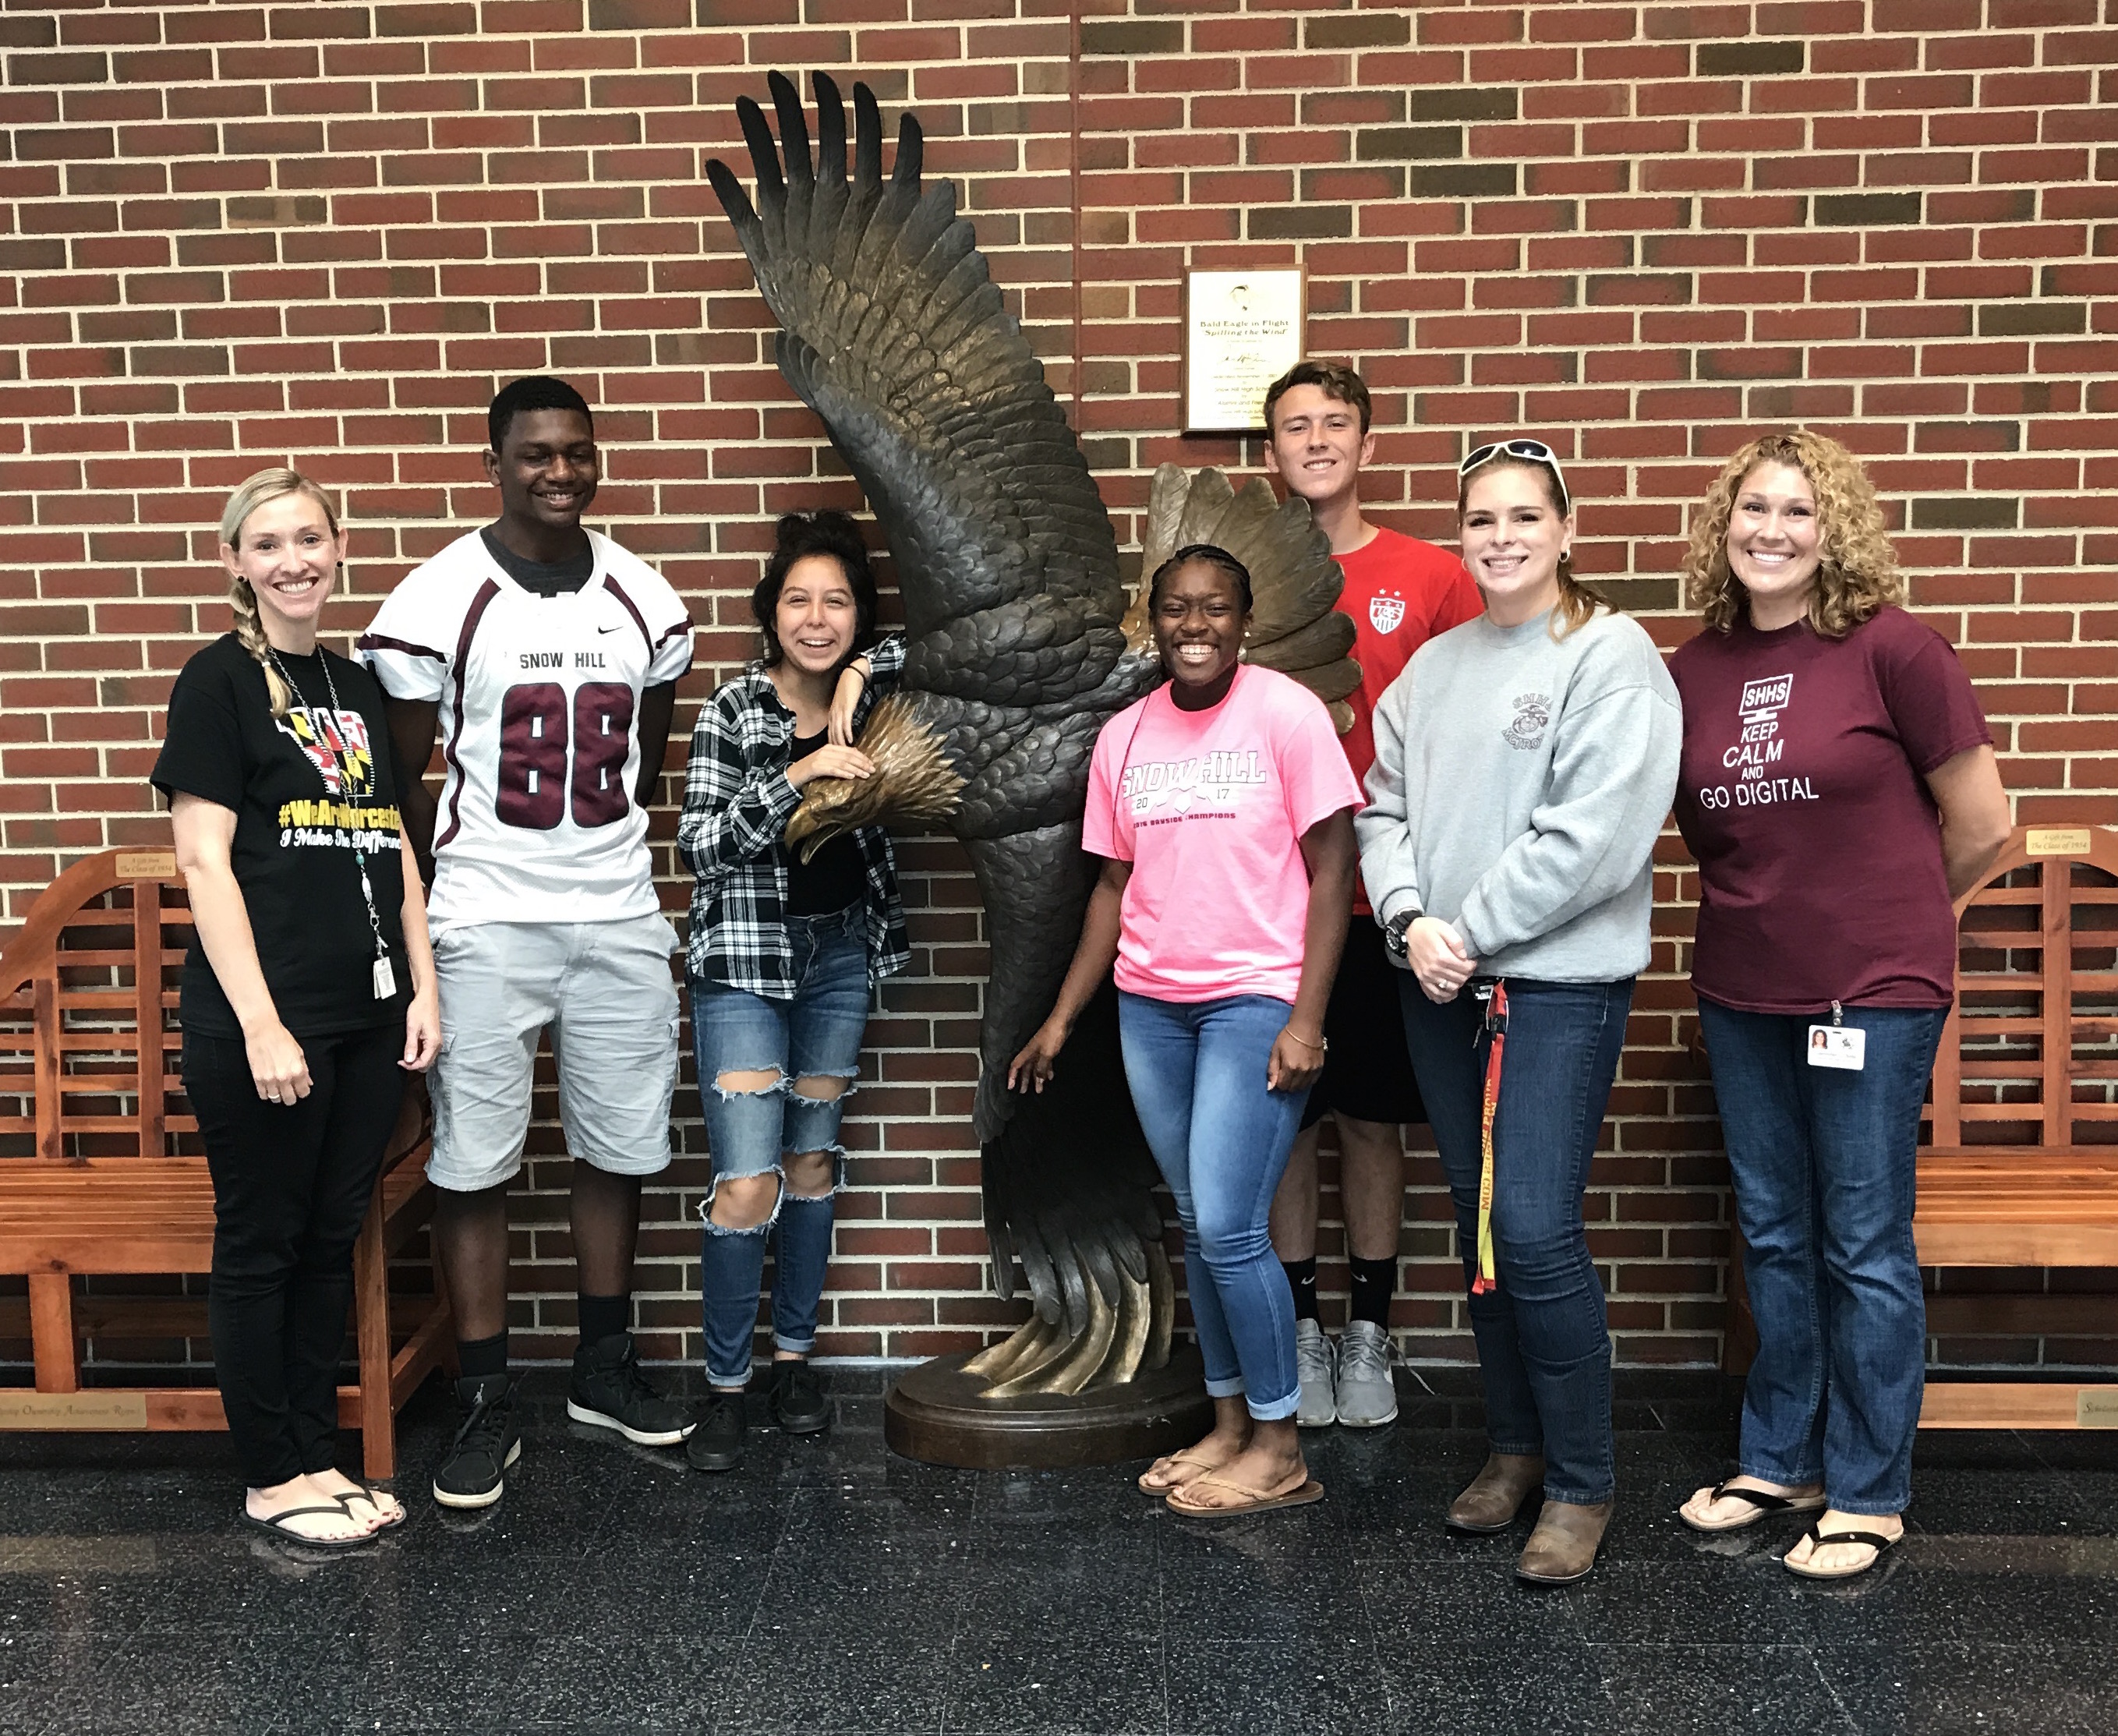 Snow Hill High School Begins Another Year with Peer Mediation